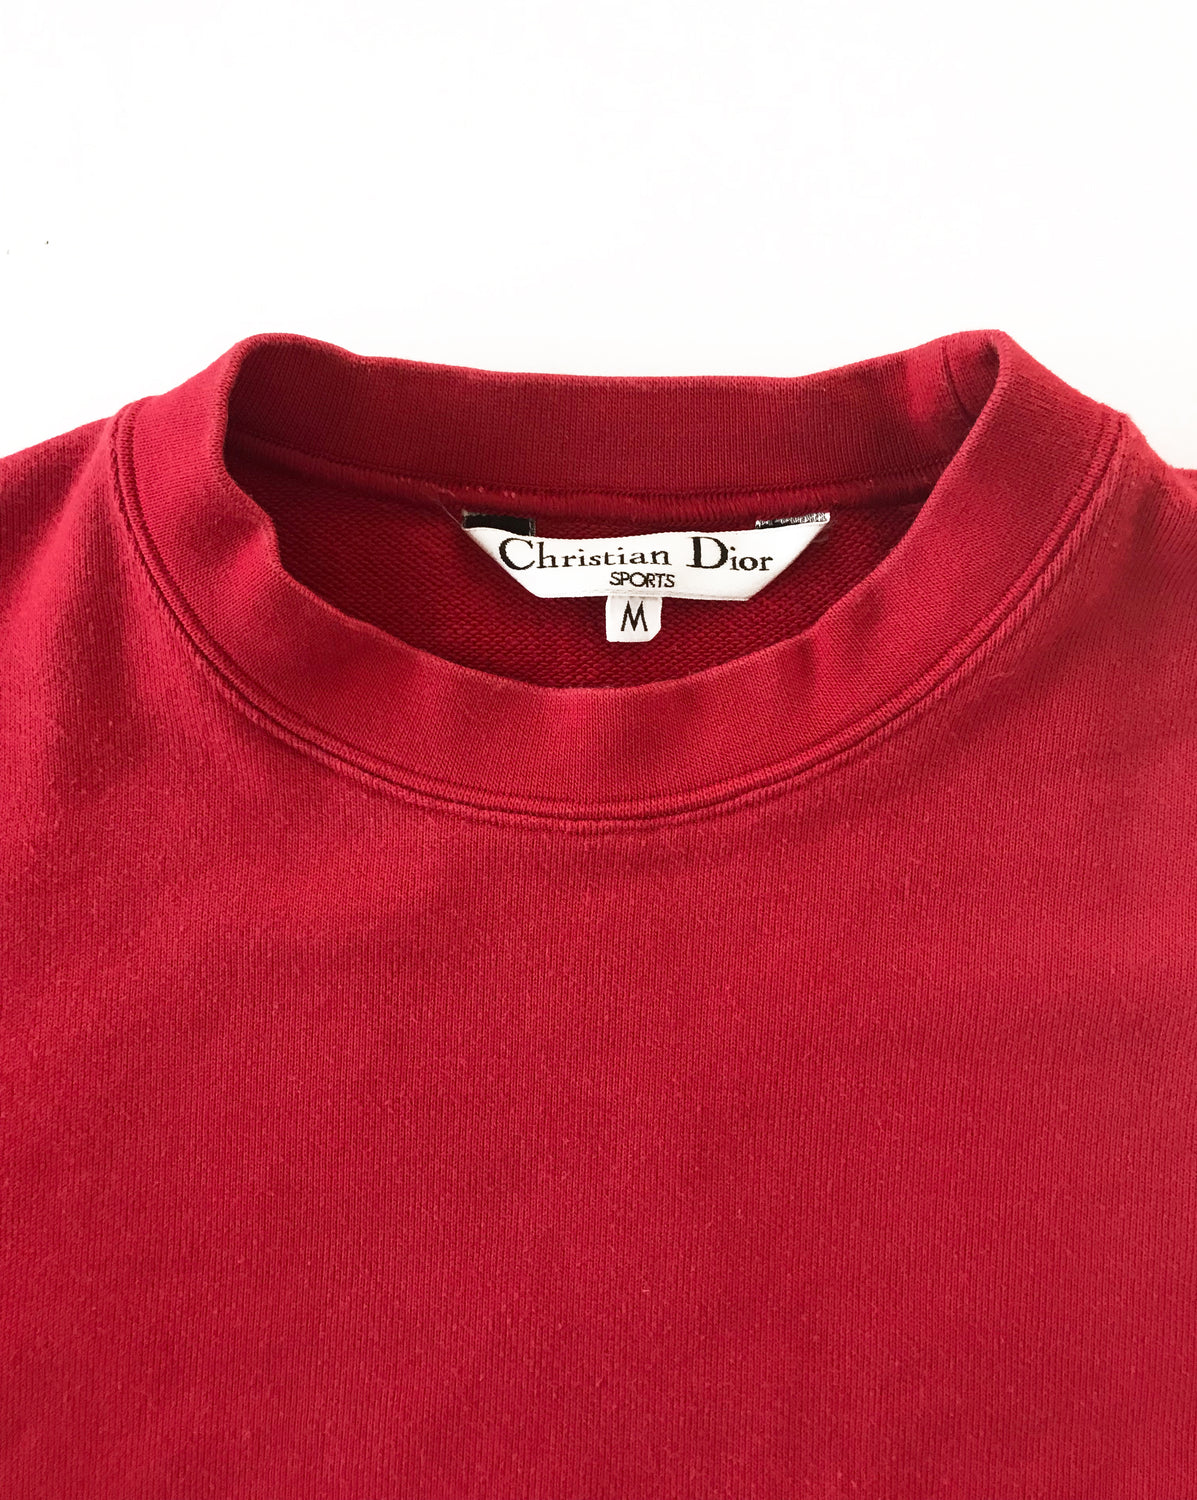 Fruit Vintage 1980s Christian Dior Sport Red Logo sweat shirt. It features a large embroidered logo design at front and classic sweat shirt cut.